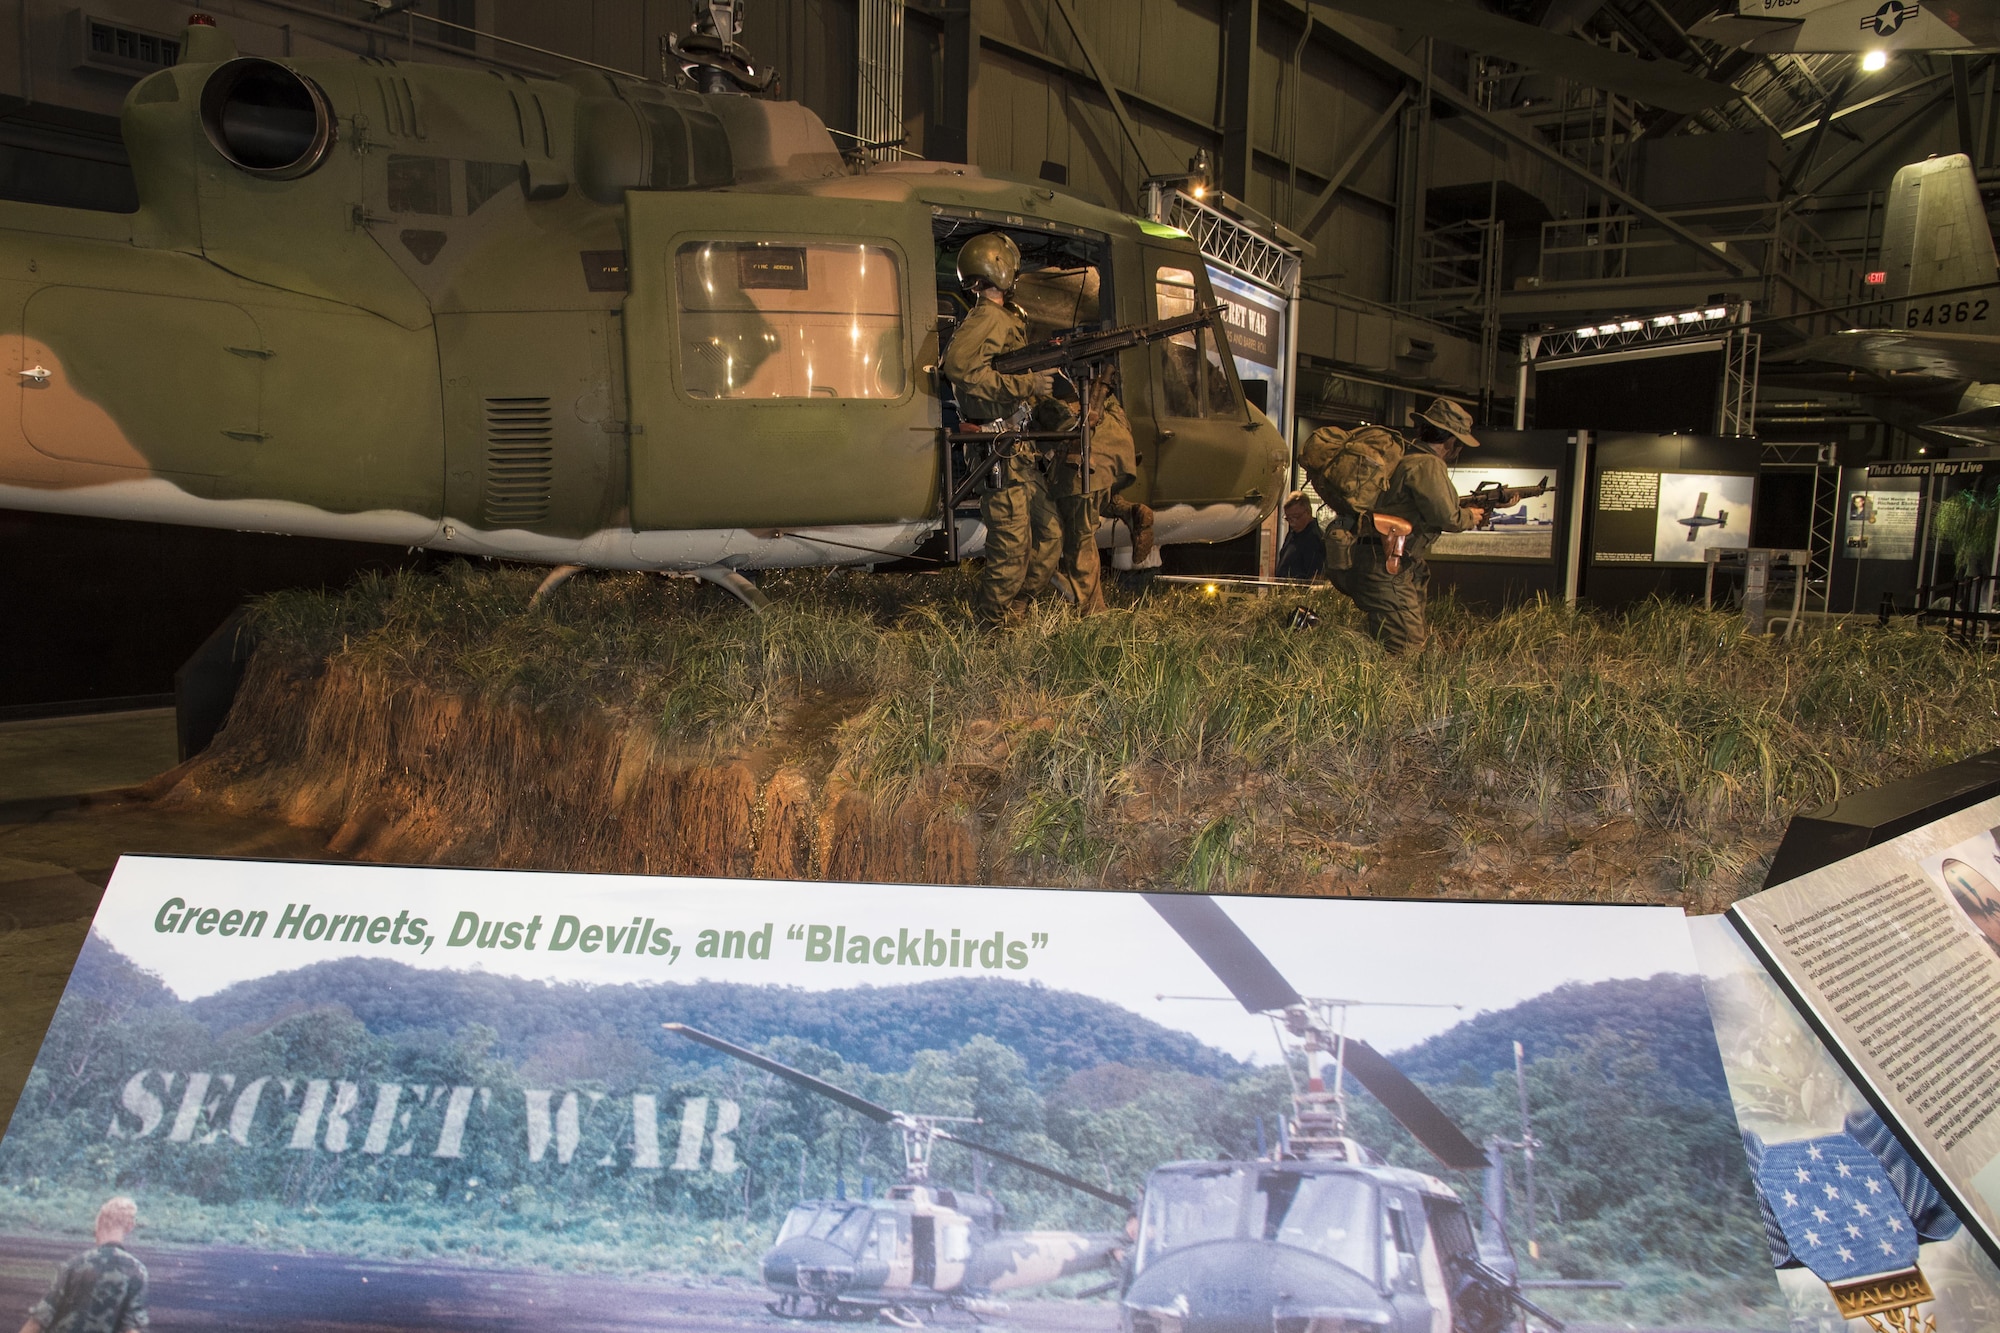 DAYTON, Ohio -- Secret War: Green Hornets, Dust Devils and Blackbirds exhibit on display in the Southeast Asia War Gallery at the National Museum of the United States Air Force. (U.S. Air Force photo by Ken LaRock) 